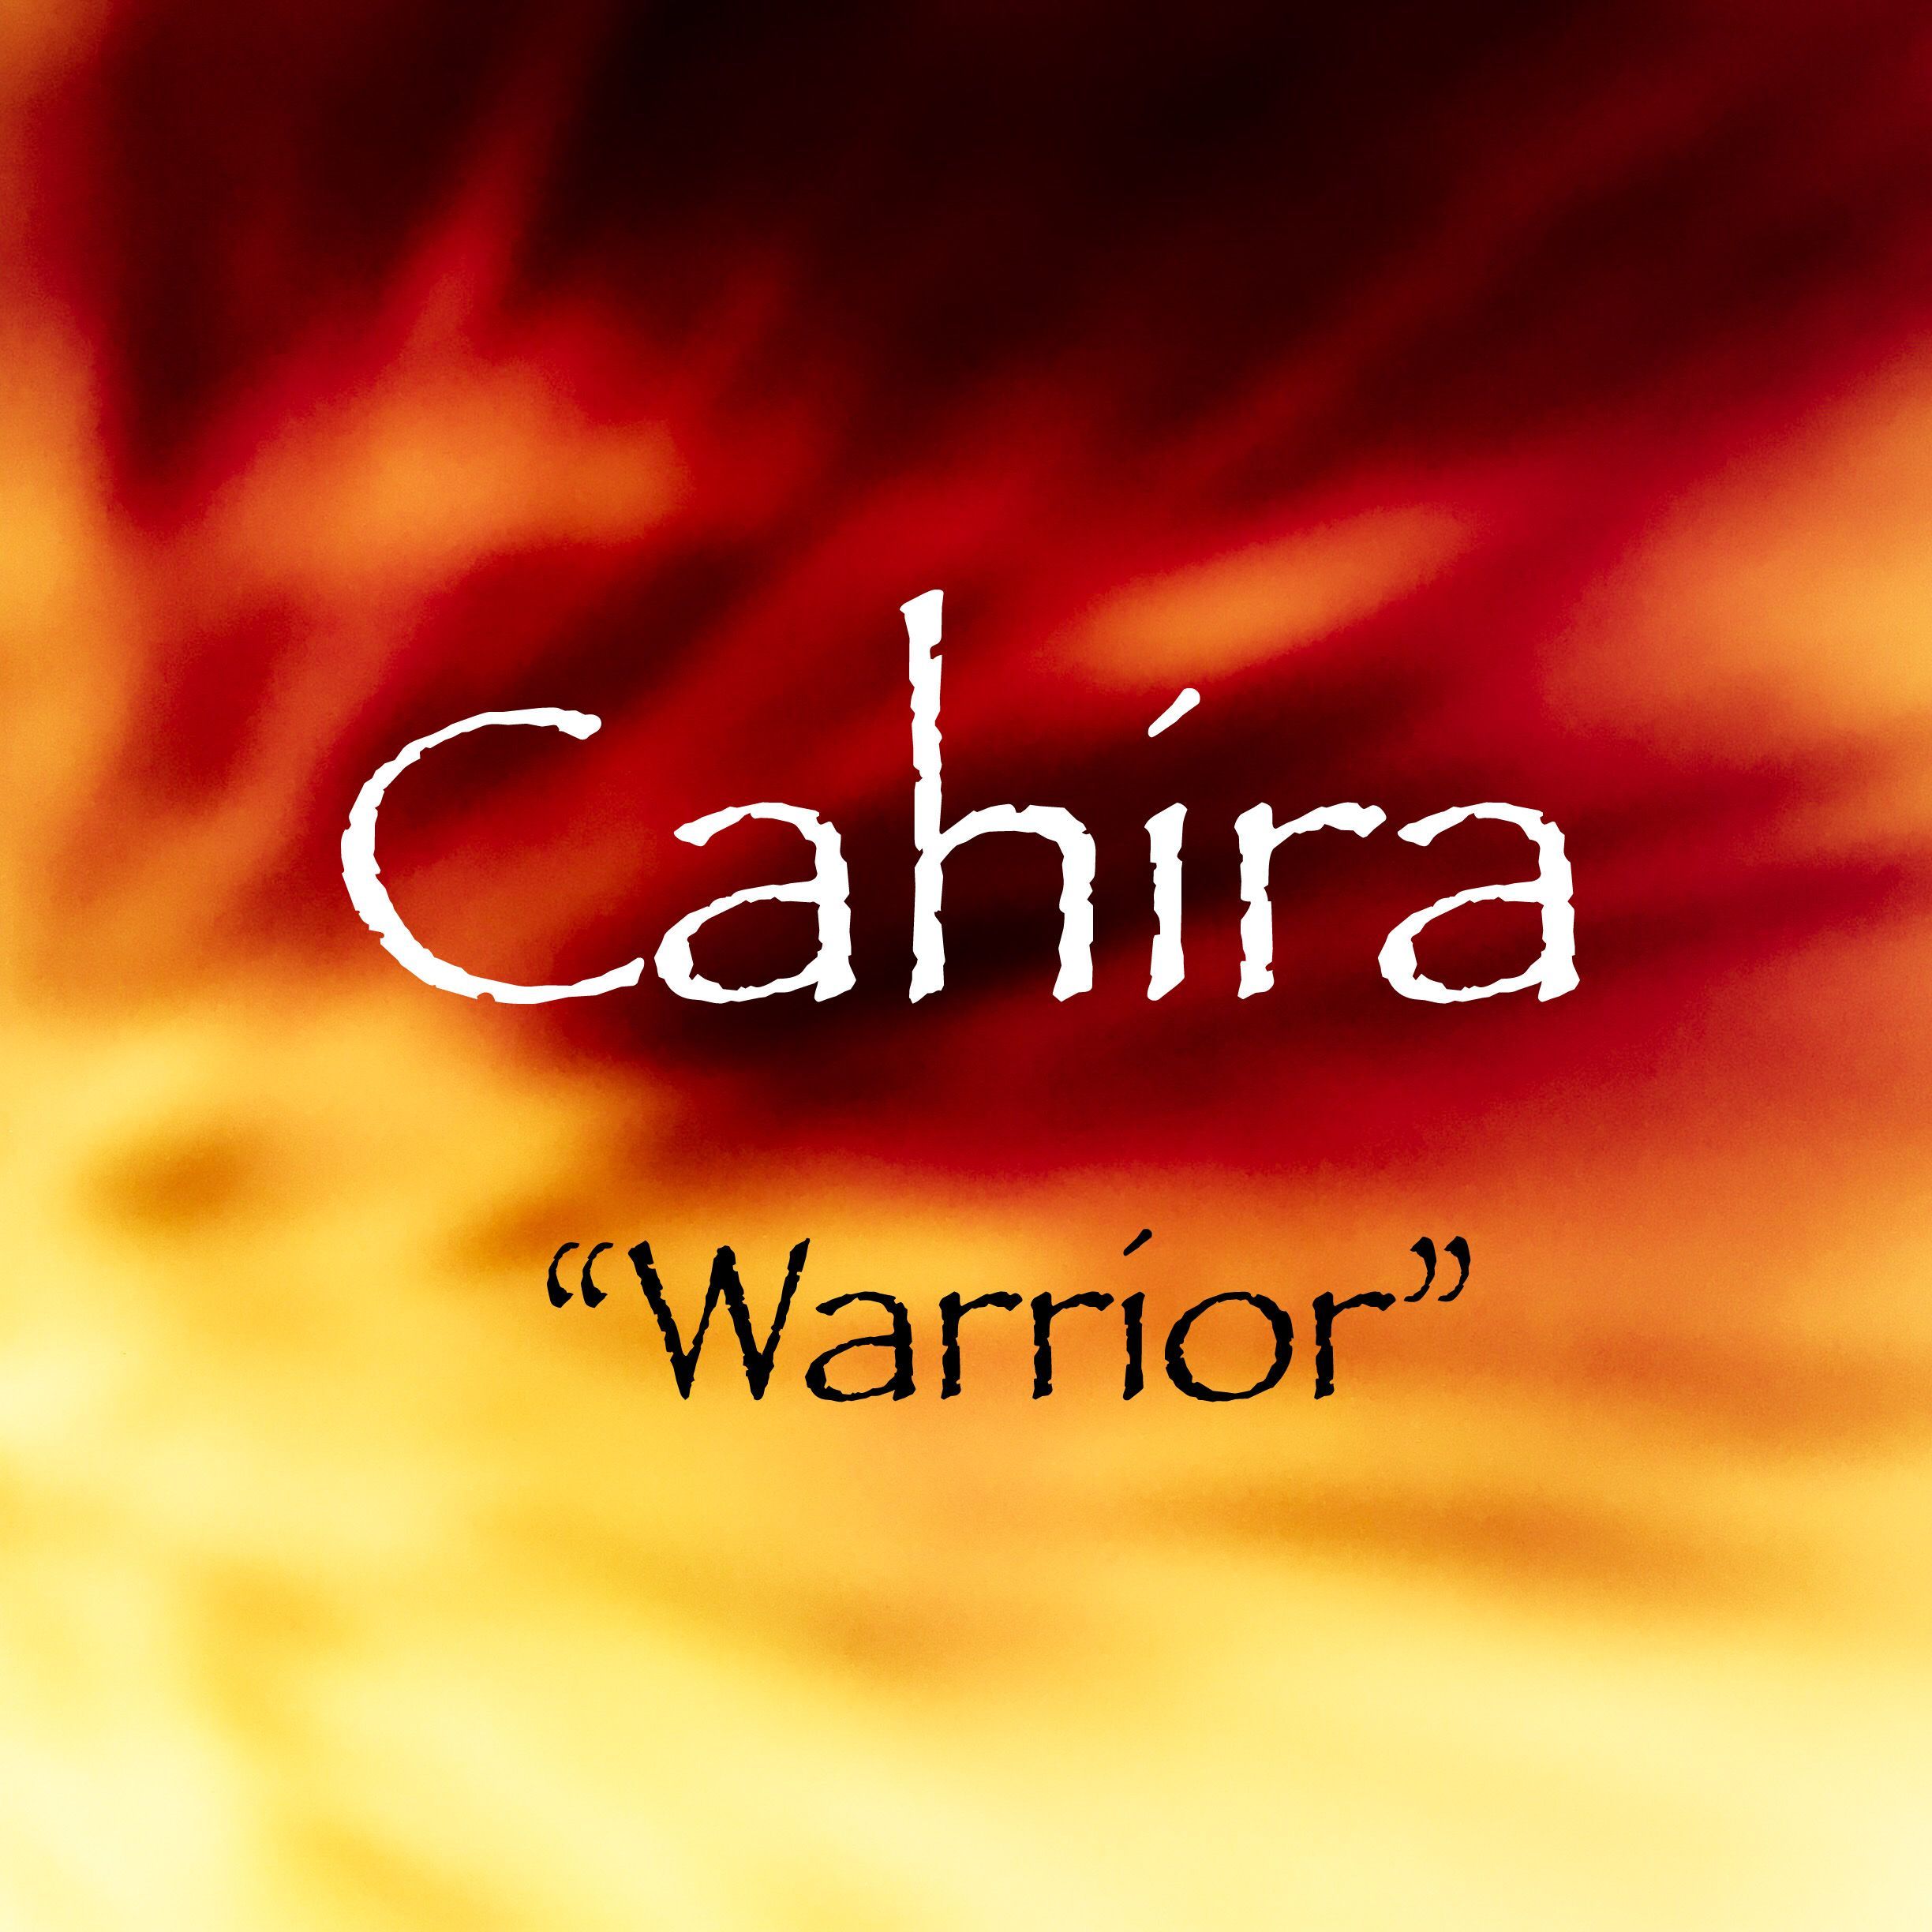 Warrior character name collection - Cahira - Warrior character name collection - Cahira -   10 beauty Words names ideas